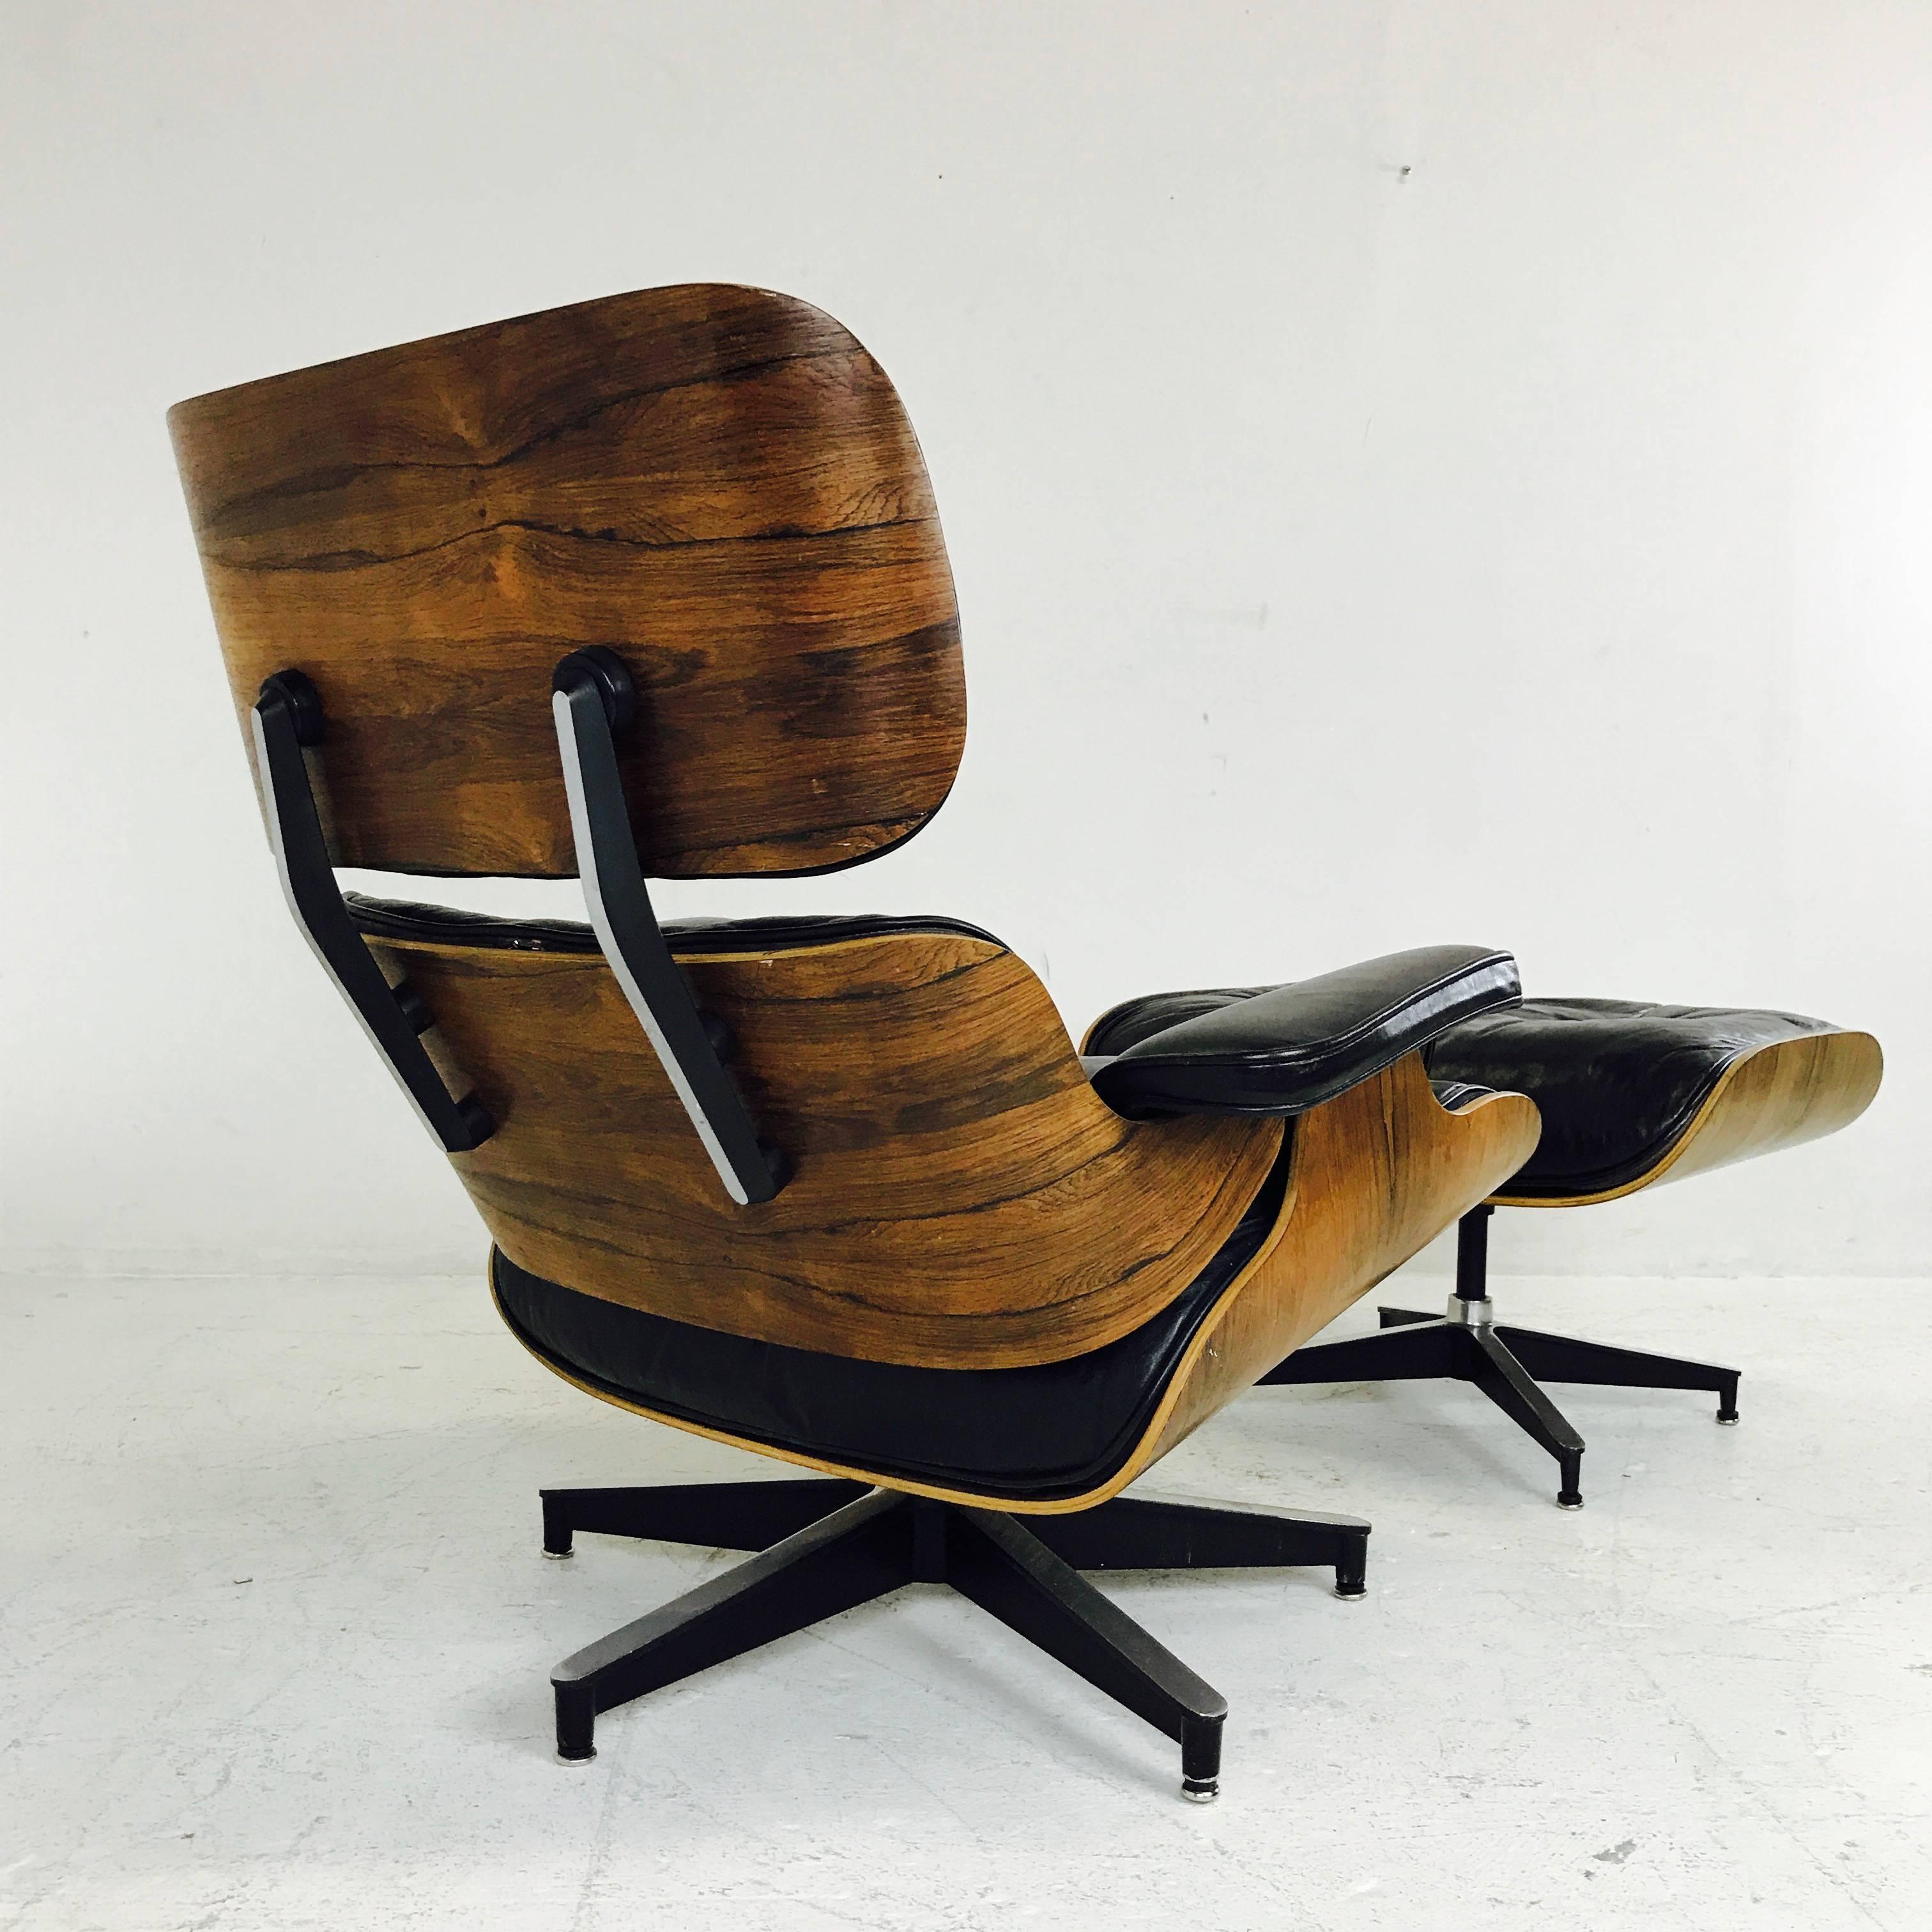 Rosewood Eames lounge chair and ottoman. Chair and ottoman are in great vintage condition with minor nicks in the wood finish.

Dimensions: 33" W x 33" D x 32" T
26" W x 21.5" D x 17" T.